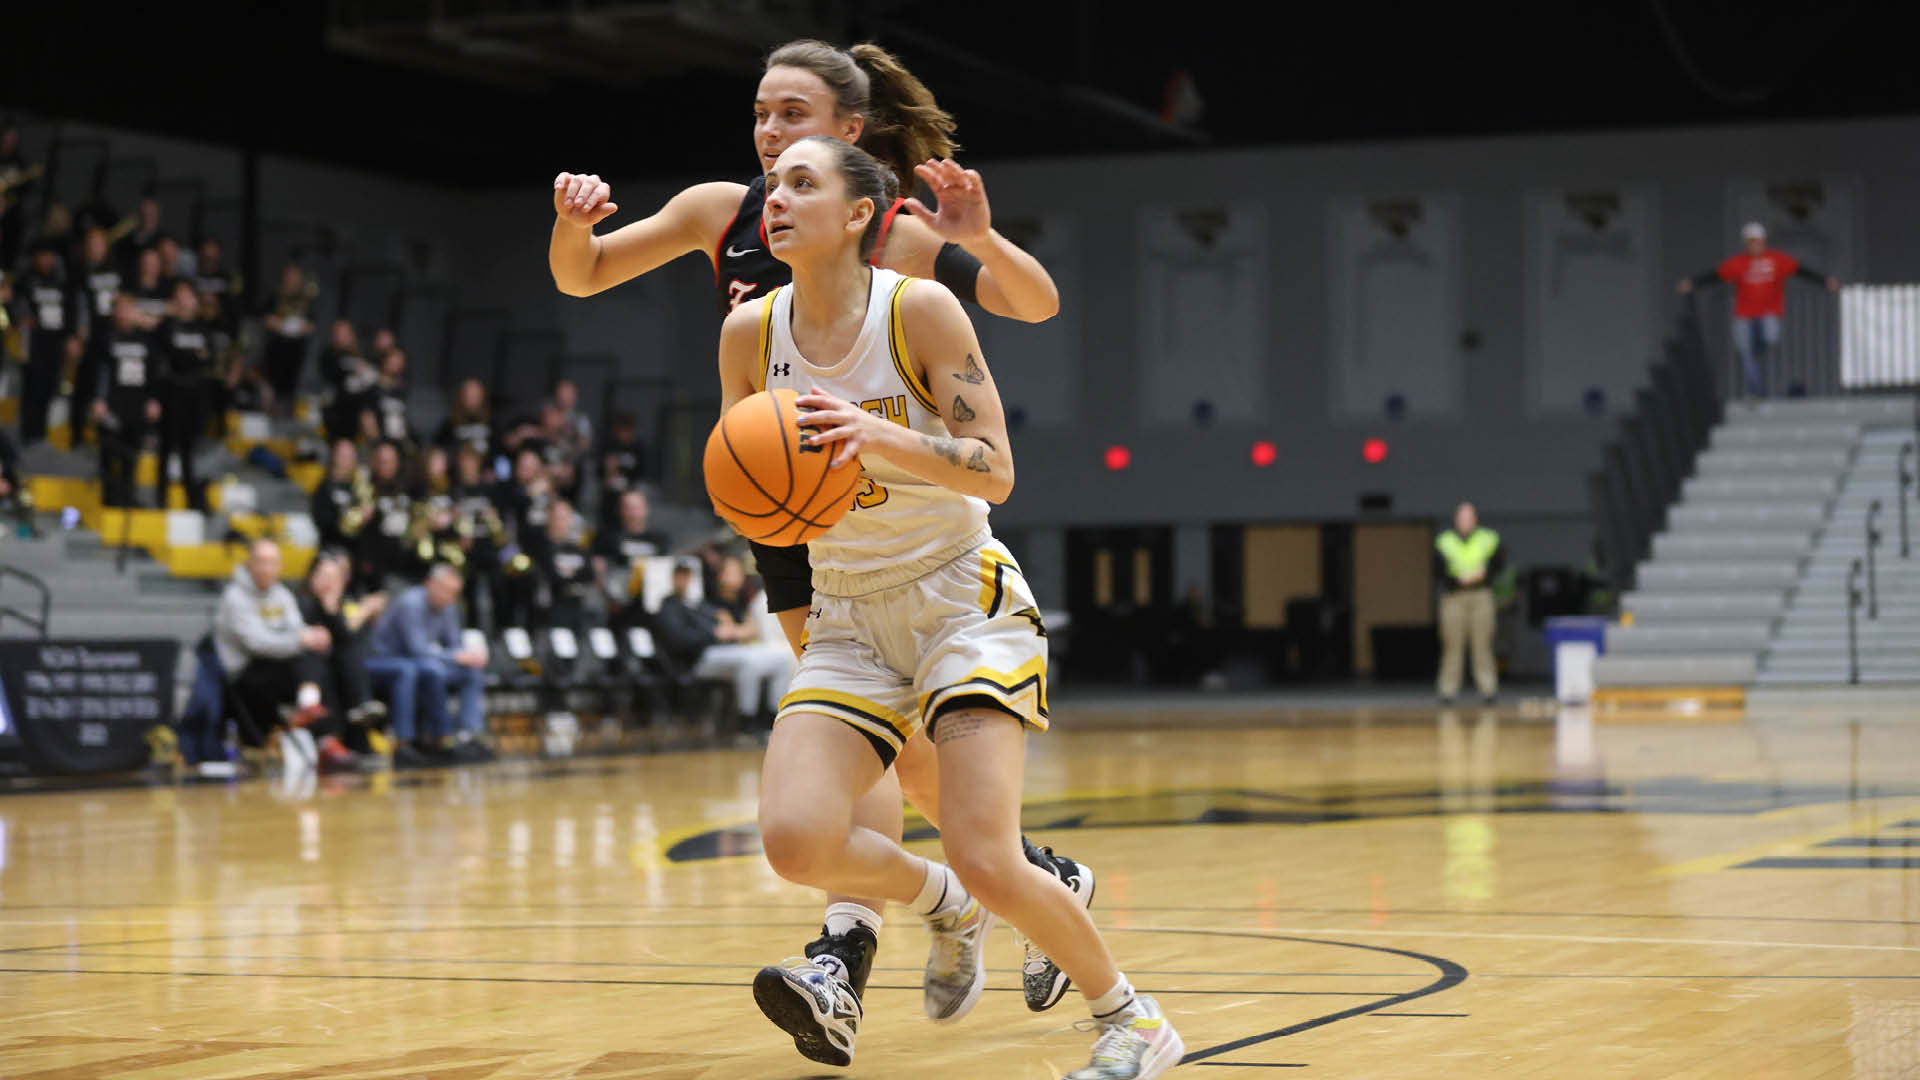 Kennedy Osterman scored 11 points in UW-Oshkosh's 70-52 win over Dubuque on Friday